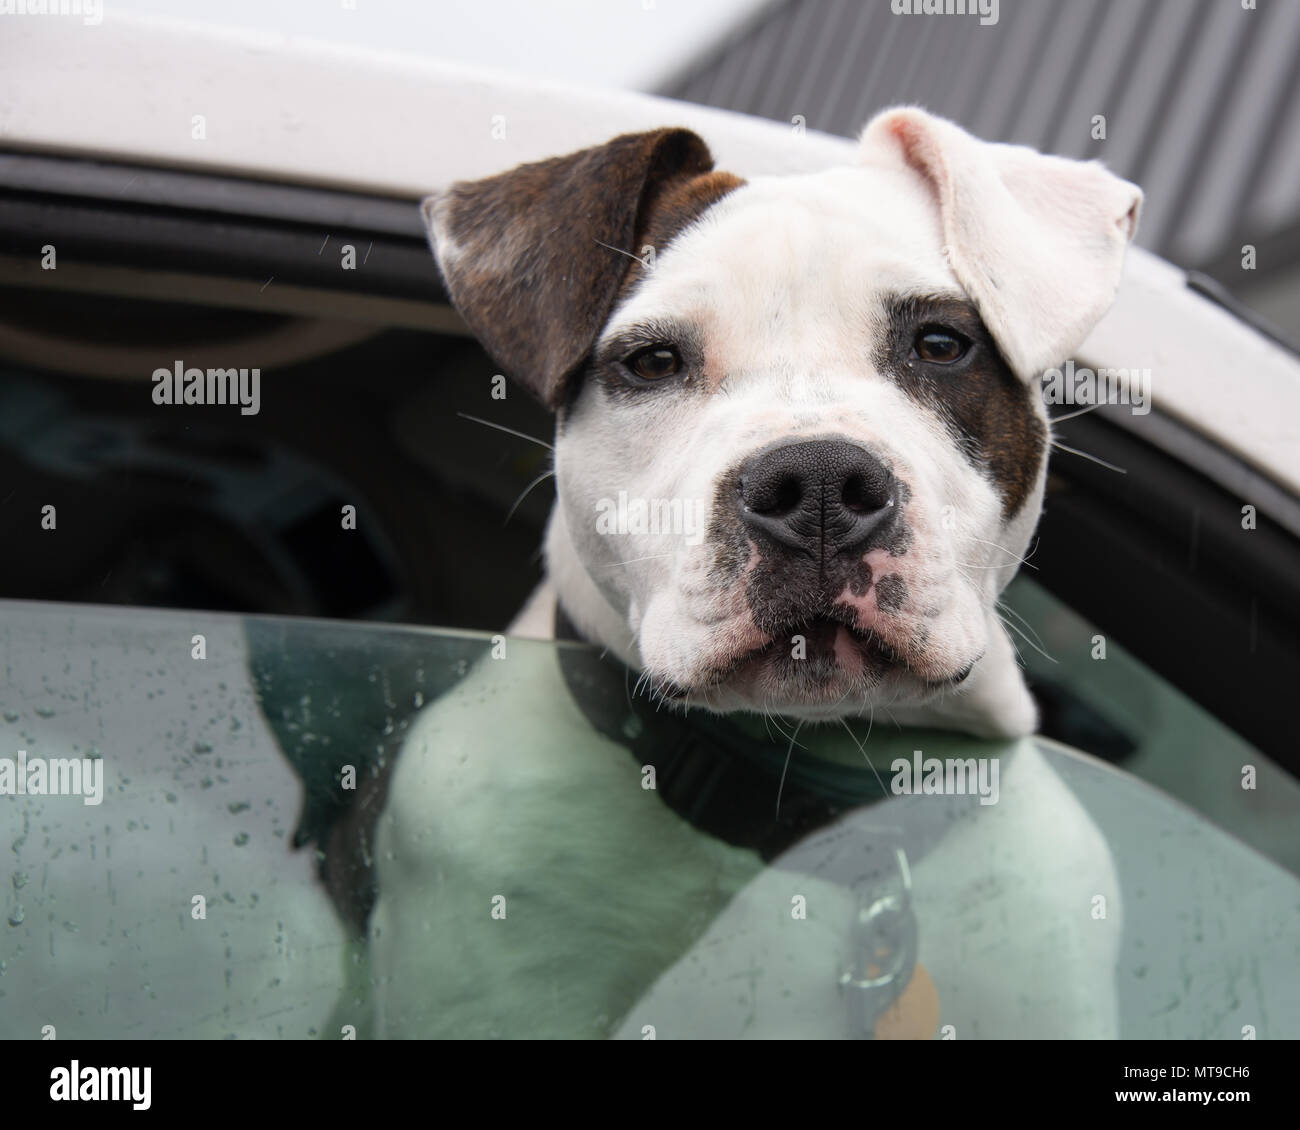 An aggressive American Pit Bull Terrier leaning out of the window of a pickup truck in a parking lot Stock Photo